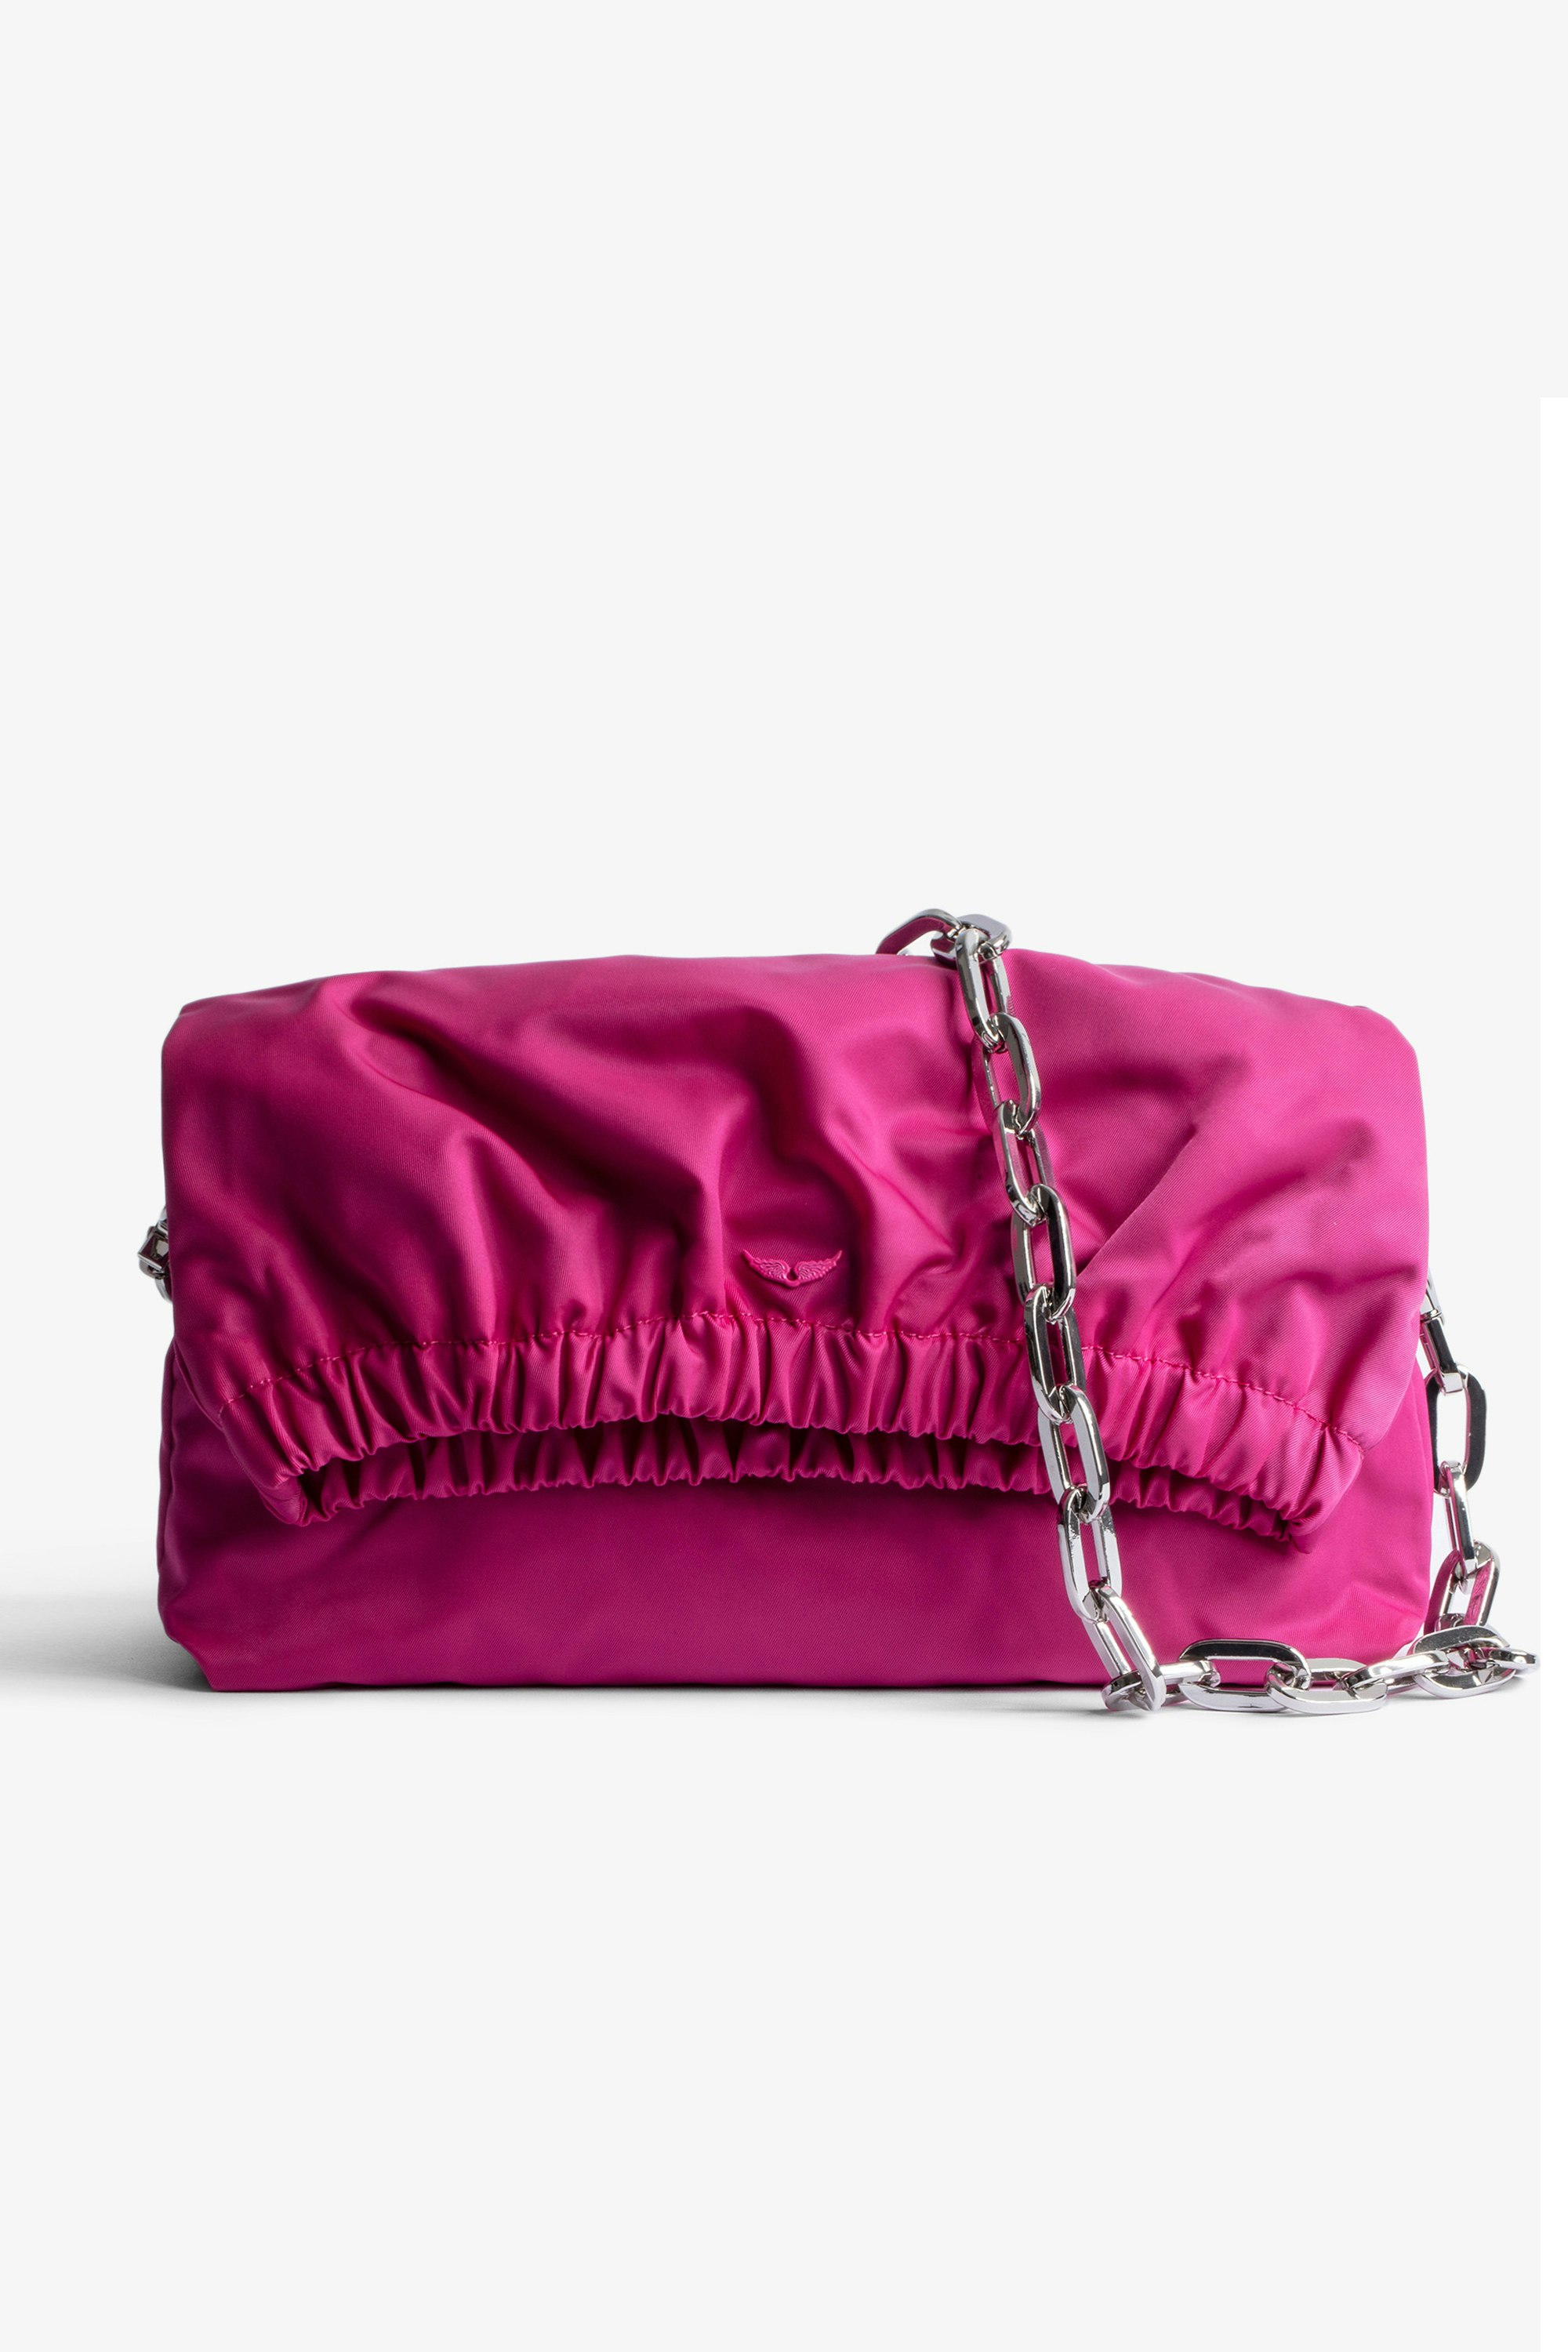 Rockyssime Bag Women’s clutch bag in pink nylon with metal chain